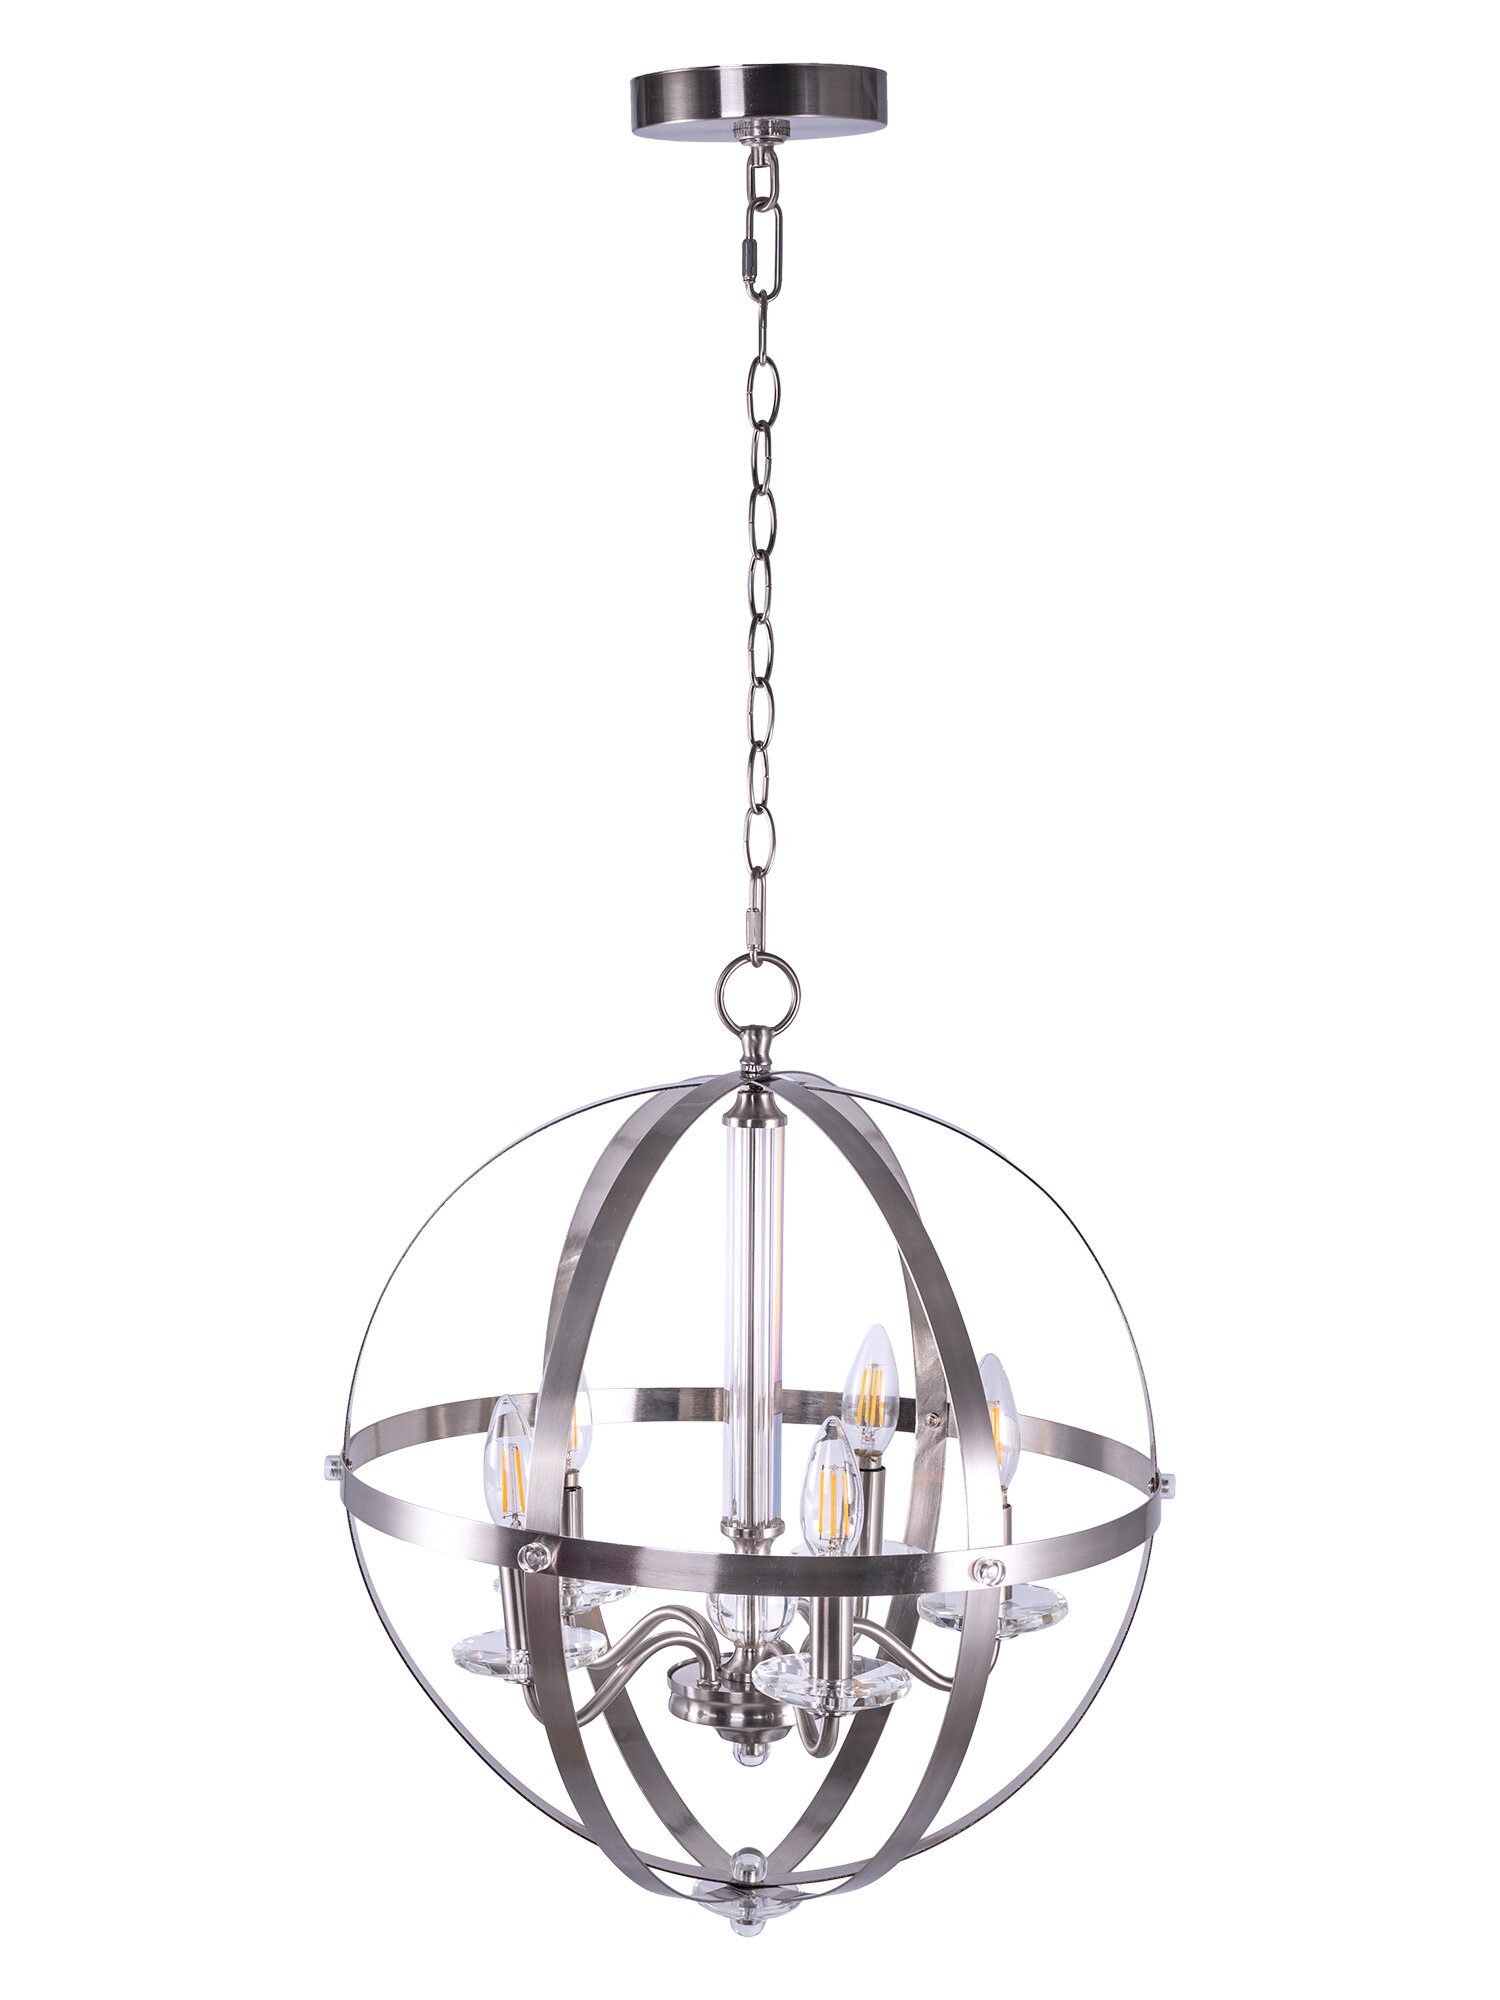 

[USA Direct] 5-Light Candle Style Globe Chandelier Industrial Rustic Indoor Pendant Light Without Bulbs